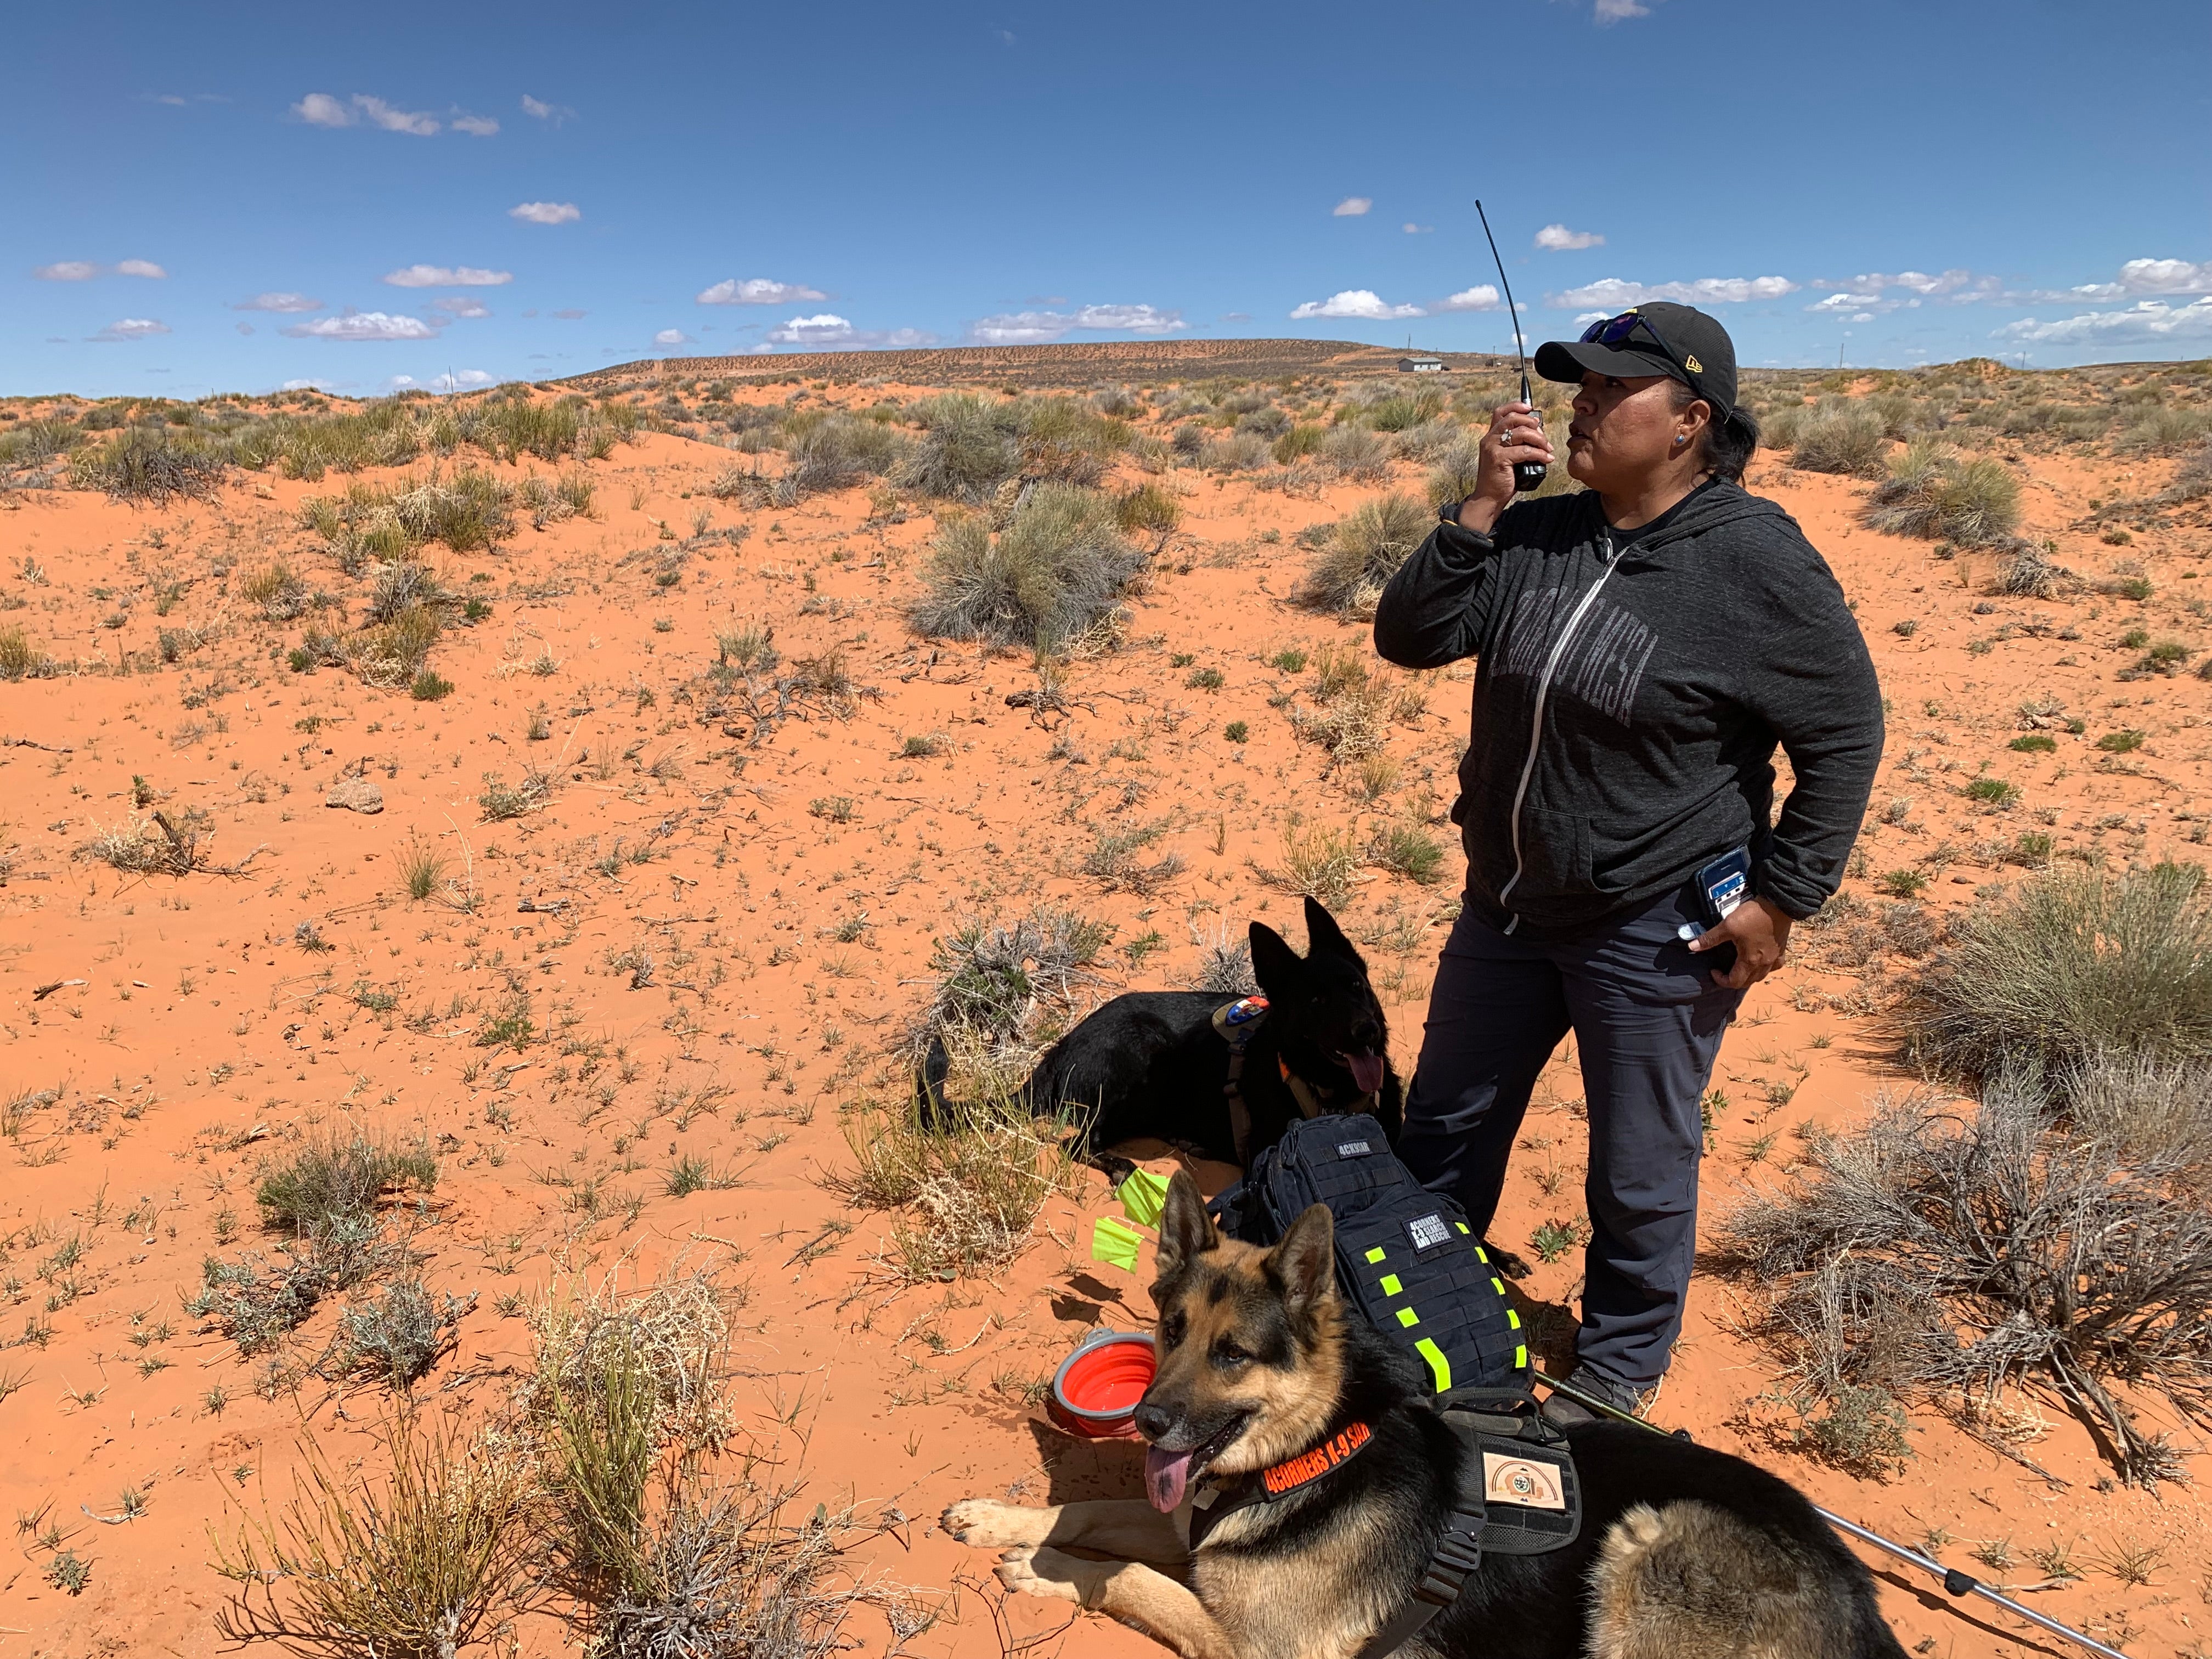 Bernadine Beyale, founder of Four Corners K9 Search and Rescue, and her two dogs, Trigger and Gunny, are seen during a search for a missing person on the Navajo Nation on April 23rd, 2022.